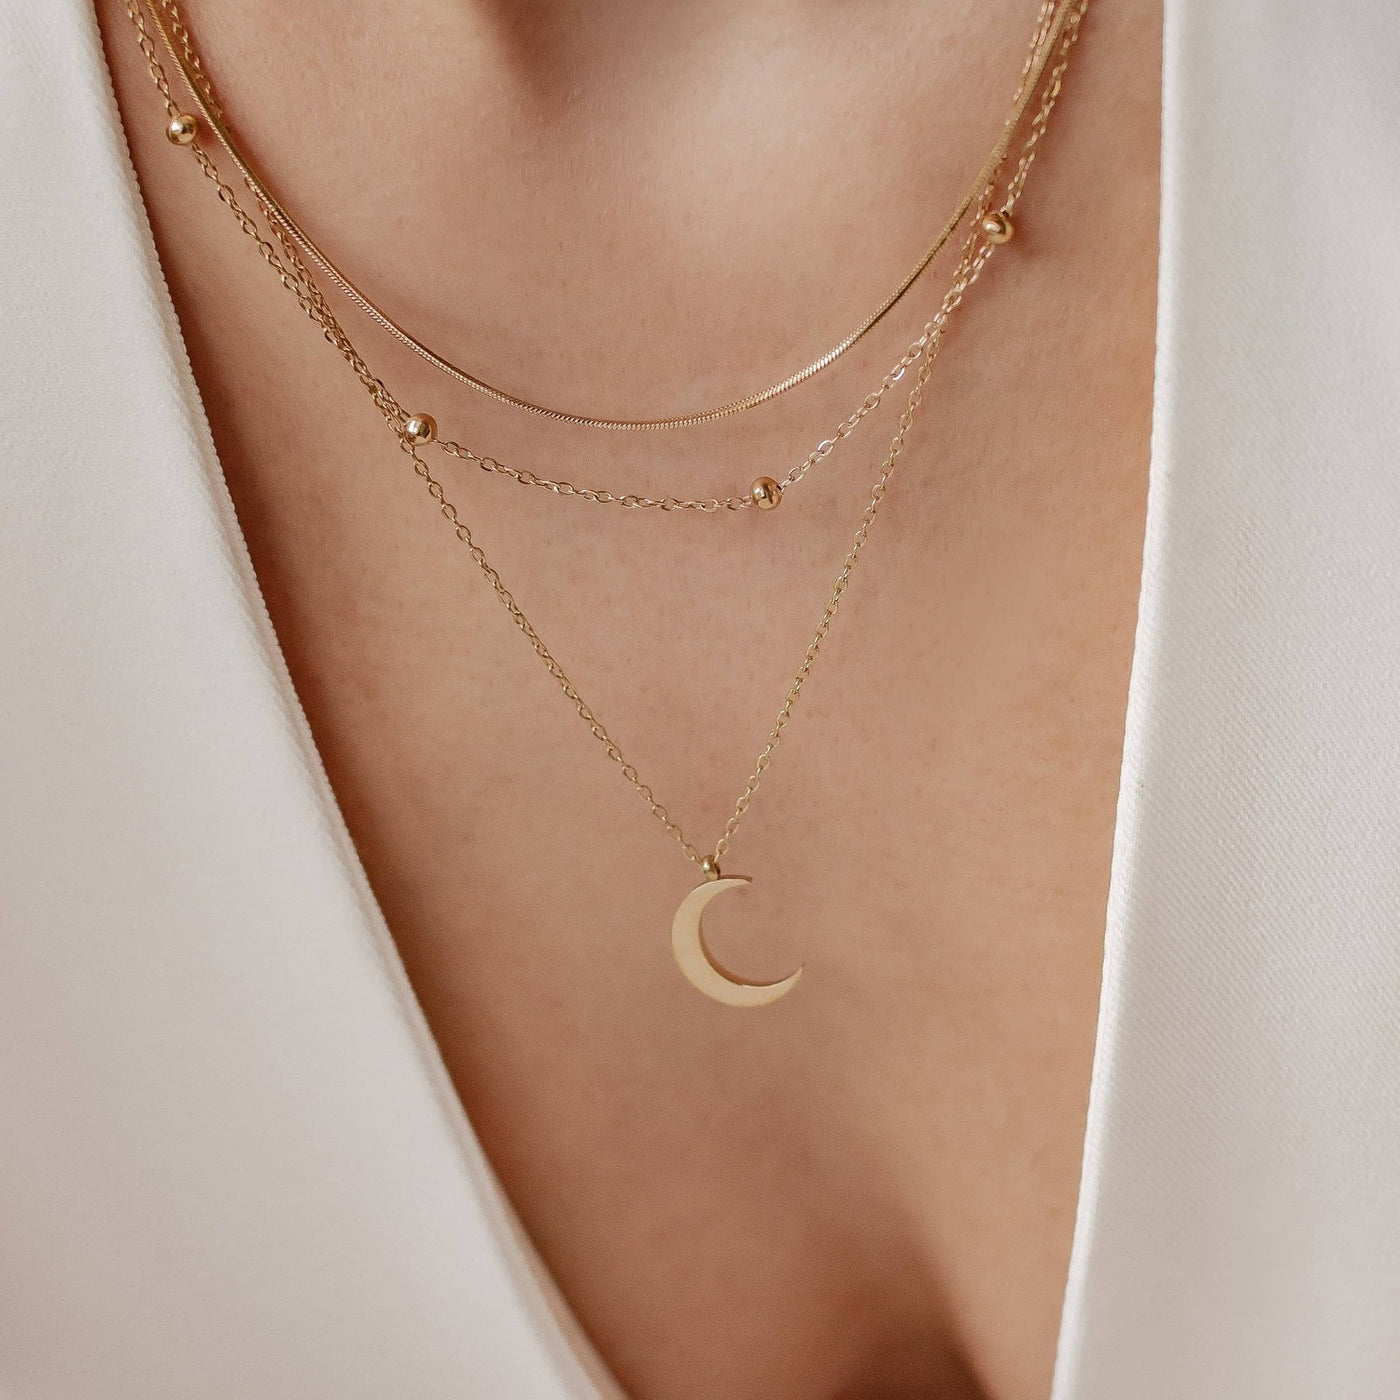 Layered Moon Necklace Set